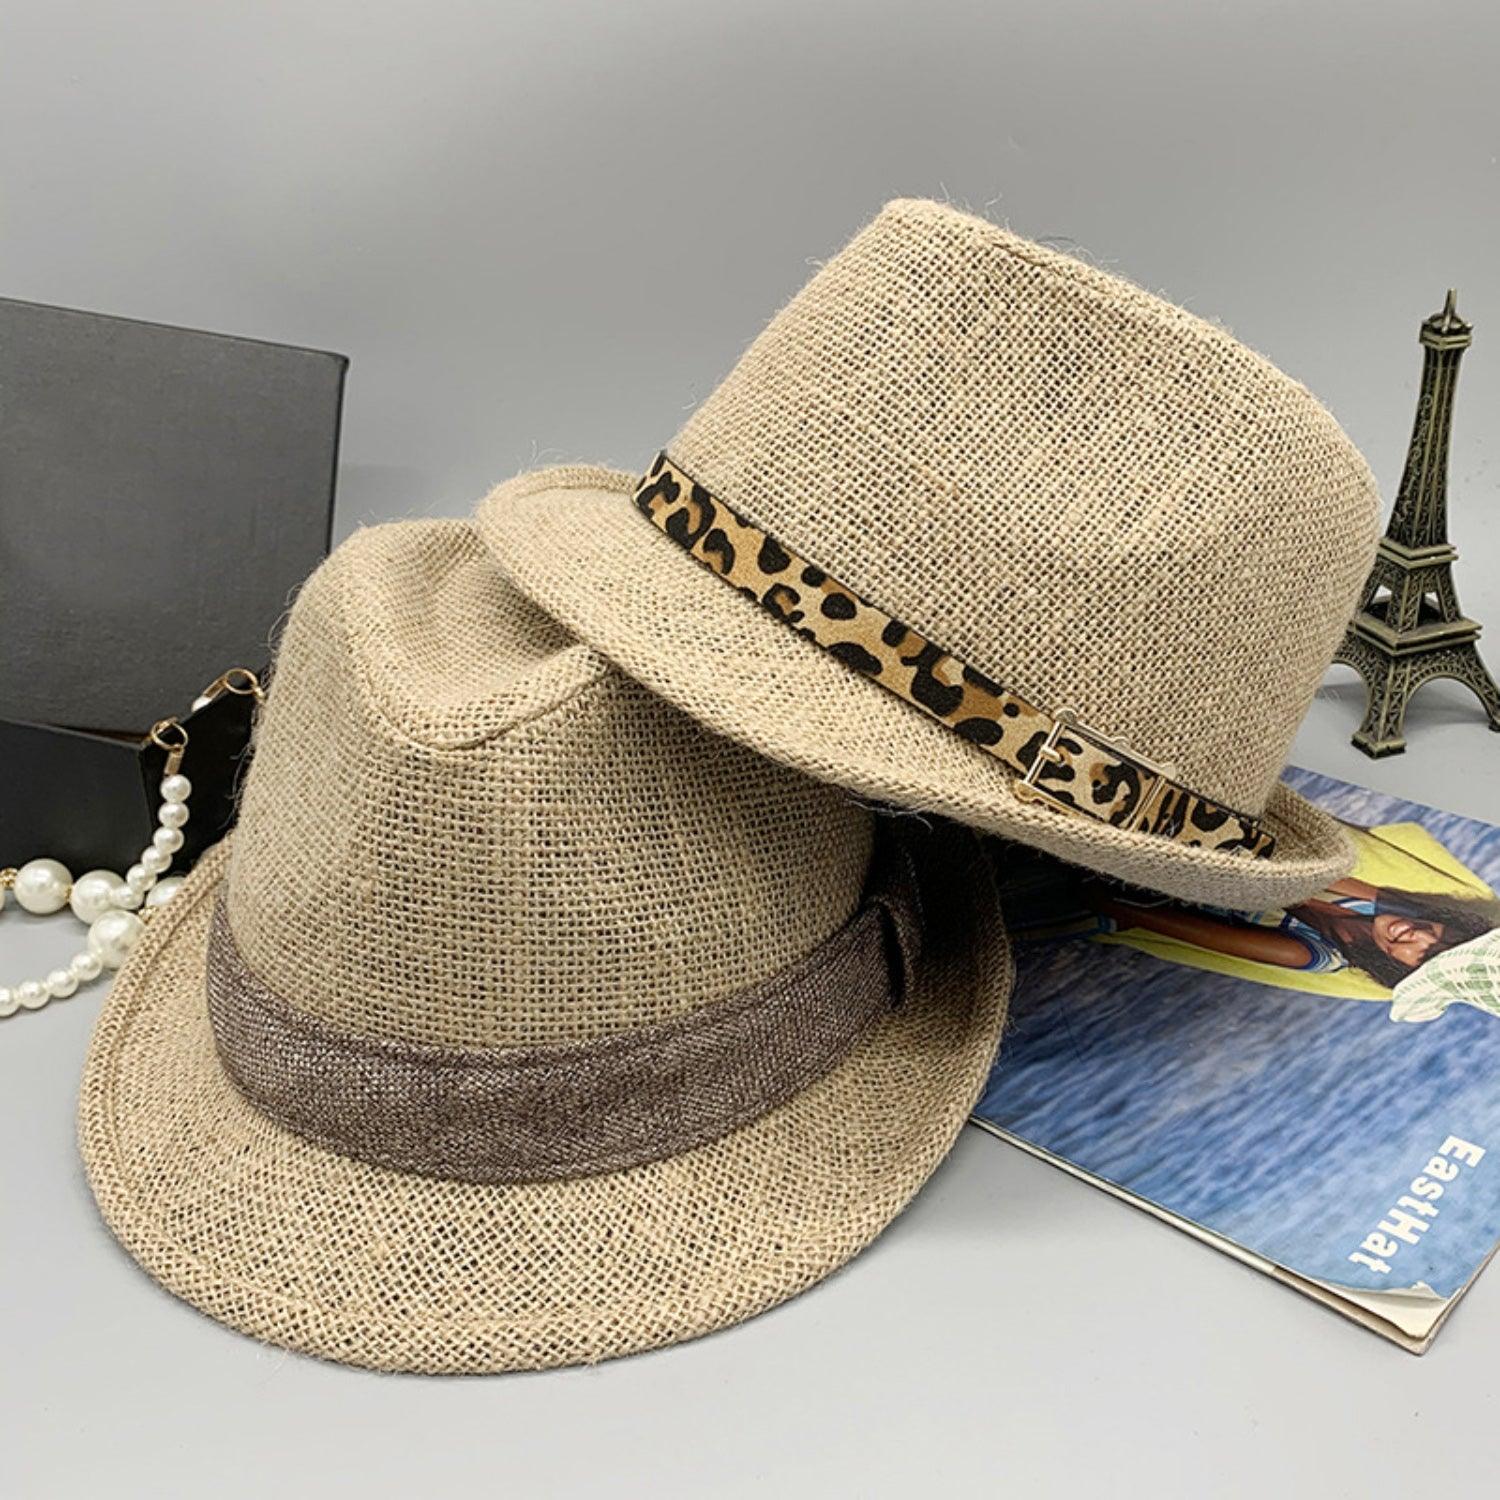 a hat and a book on a table